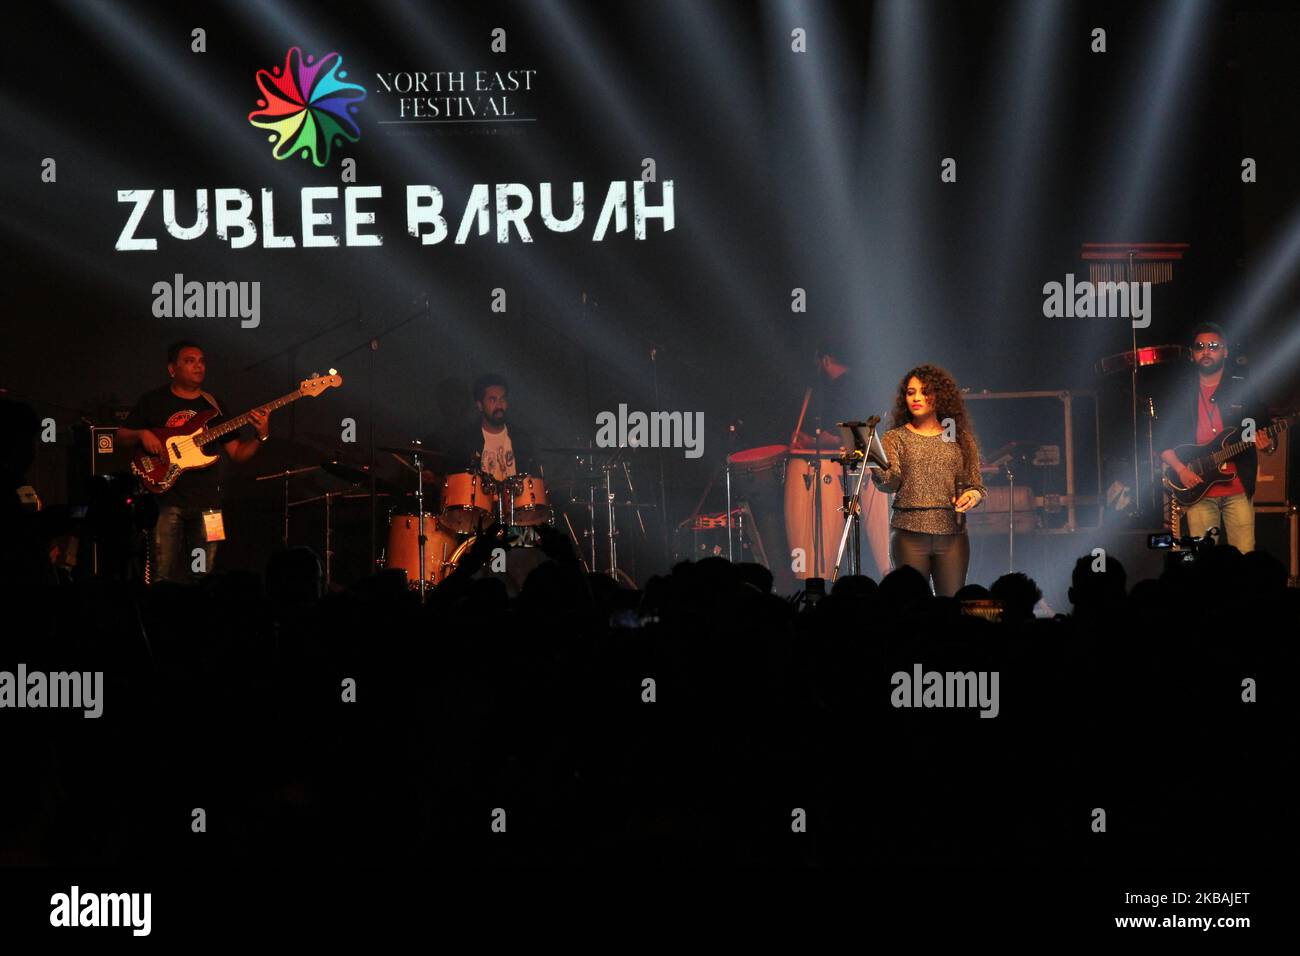 Zublee Baruah, Assamese playback singer and actor, performs during the Northeast Festival 2019 on November 10, 2019 at Indira Gandhi National Centre for the Arts in New Delhi, India. (Photo by Mayank Makhija/NurPhoto) Stock Photo